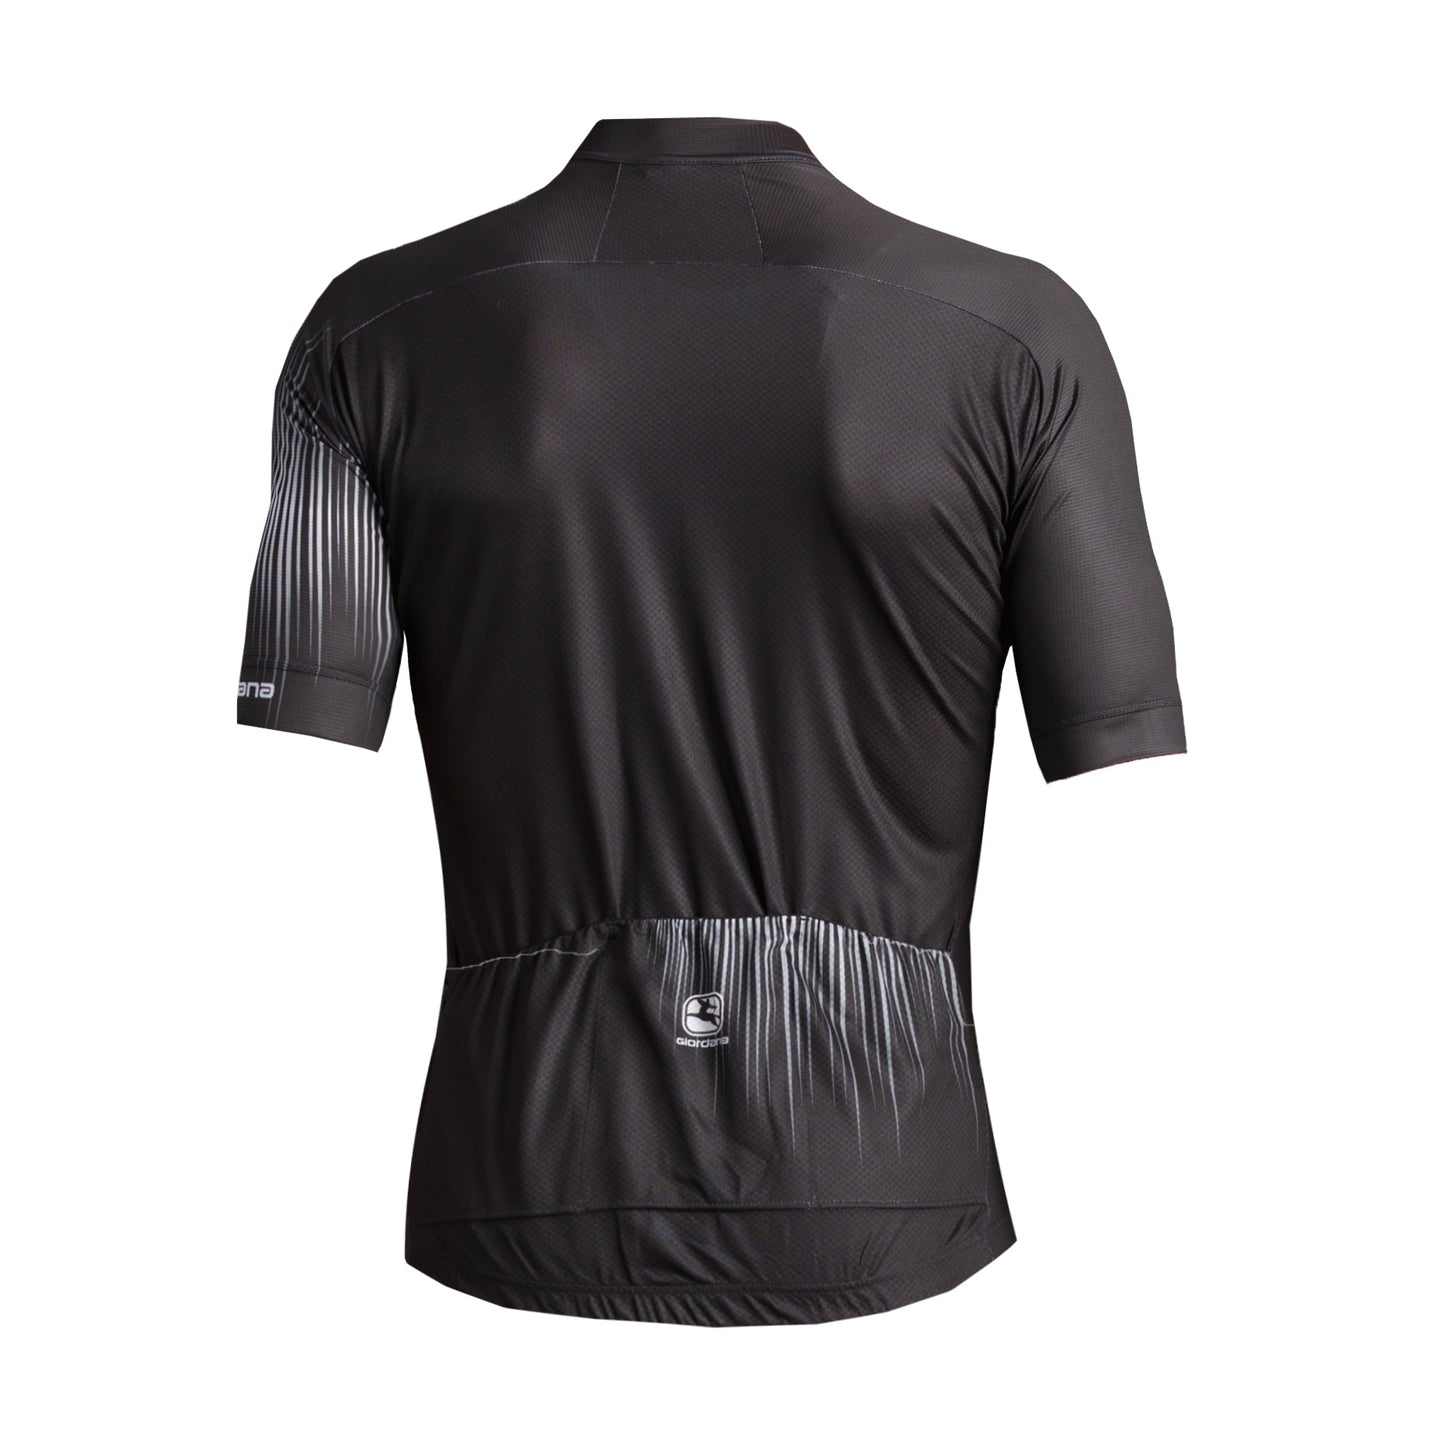 Tenax Pro Frequency S/S Jersey